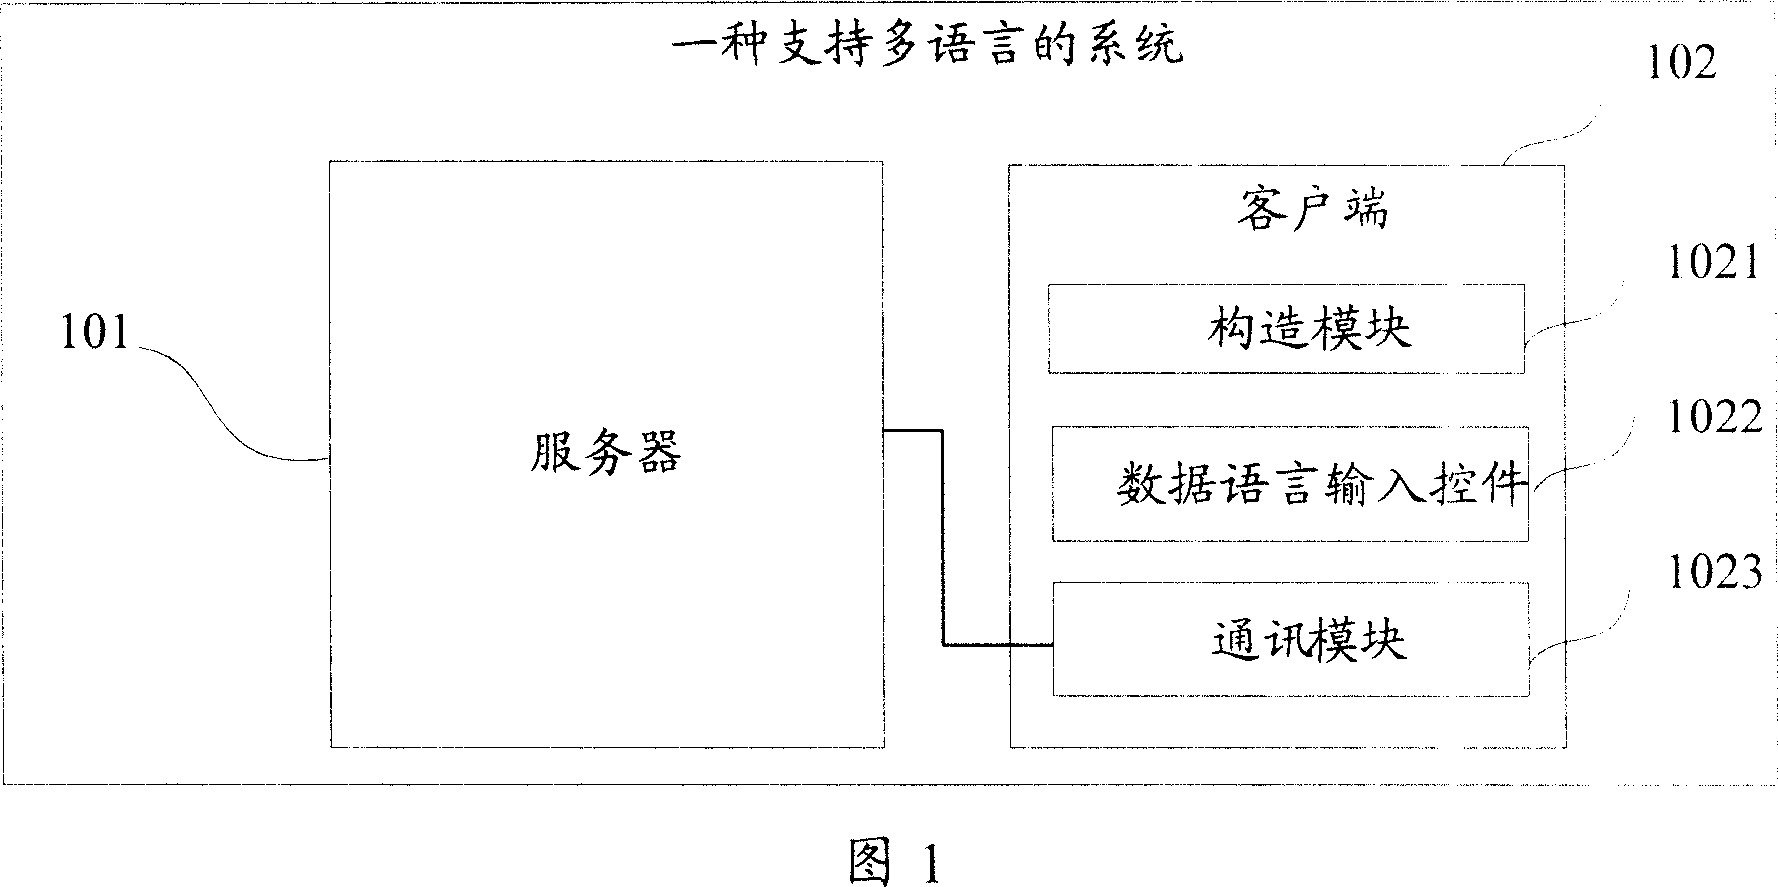 System for supporting multi-language and method for inputting and reading multi-language data